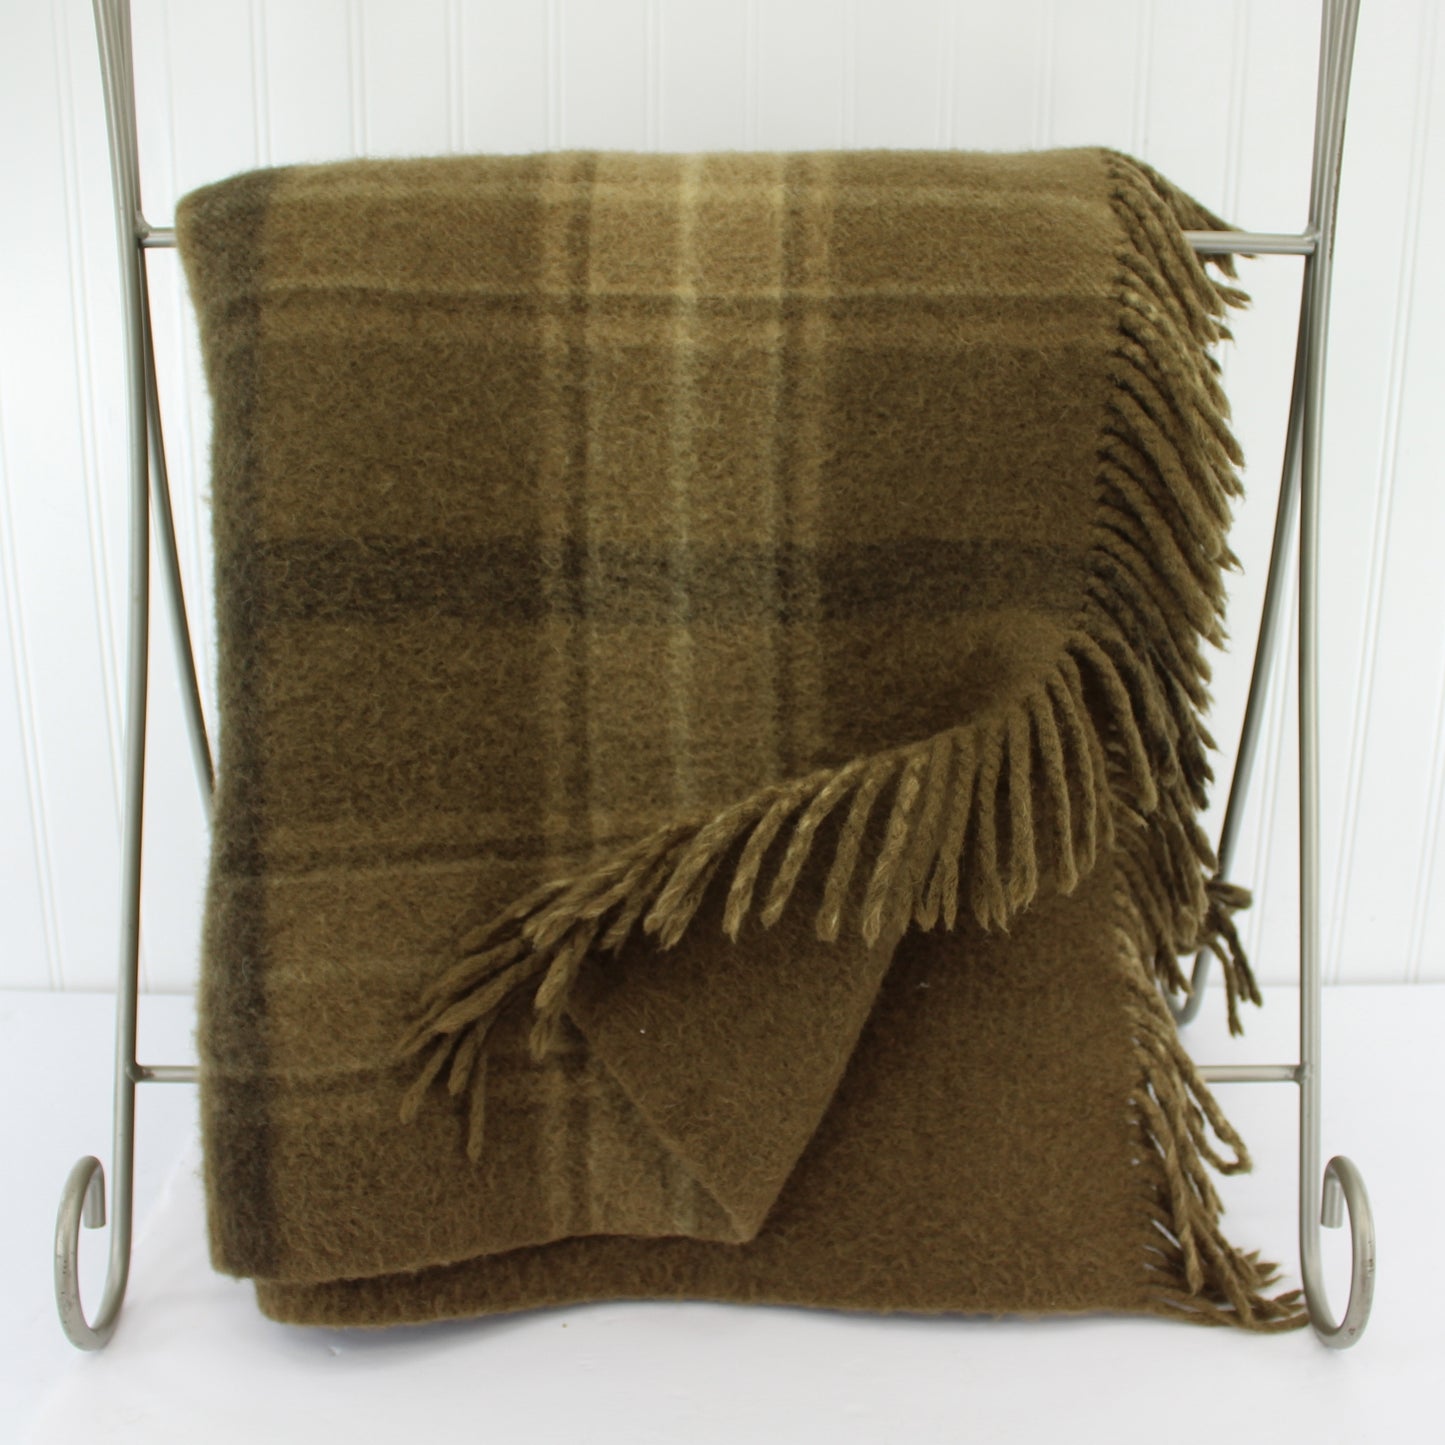 Sibley Lindsay Curr Rochester NY Wool Throw Blanket Very Heavy Reversible Brown Plaid to Solid